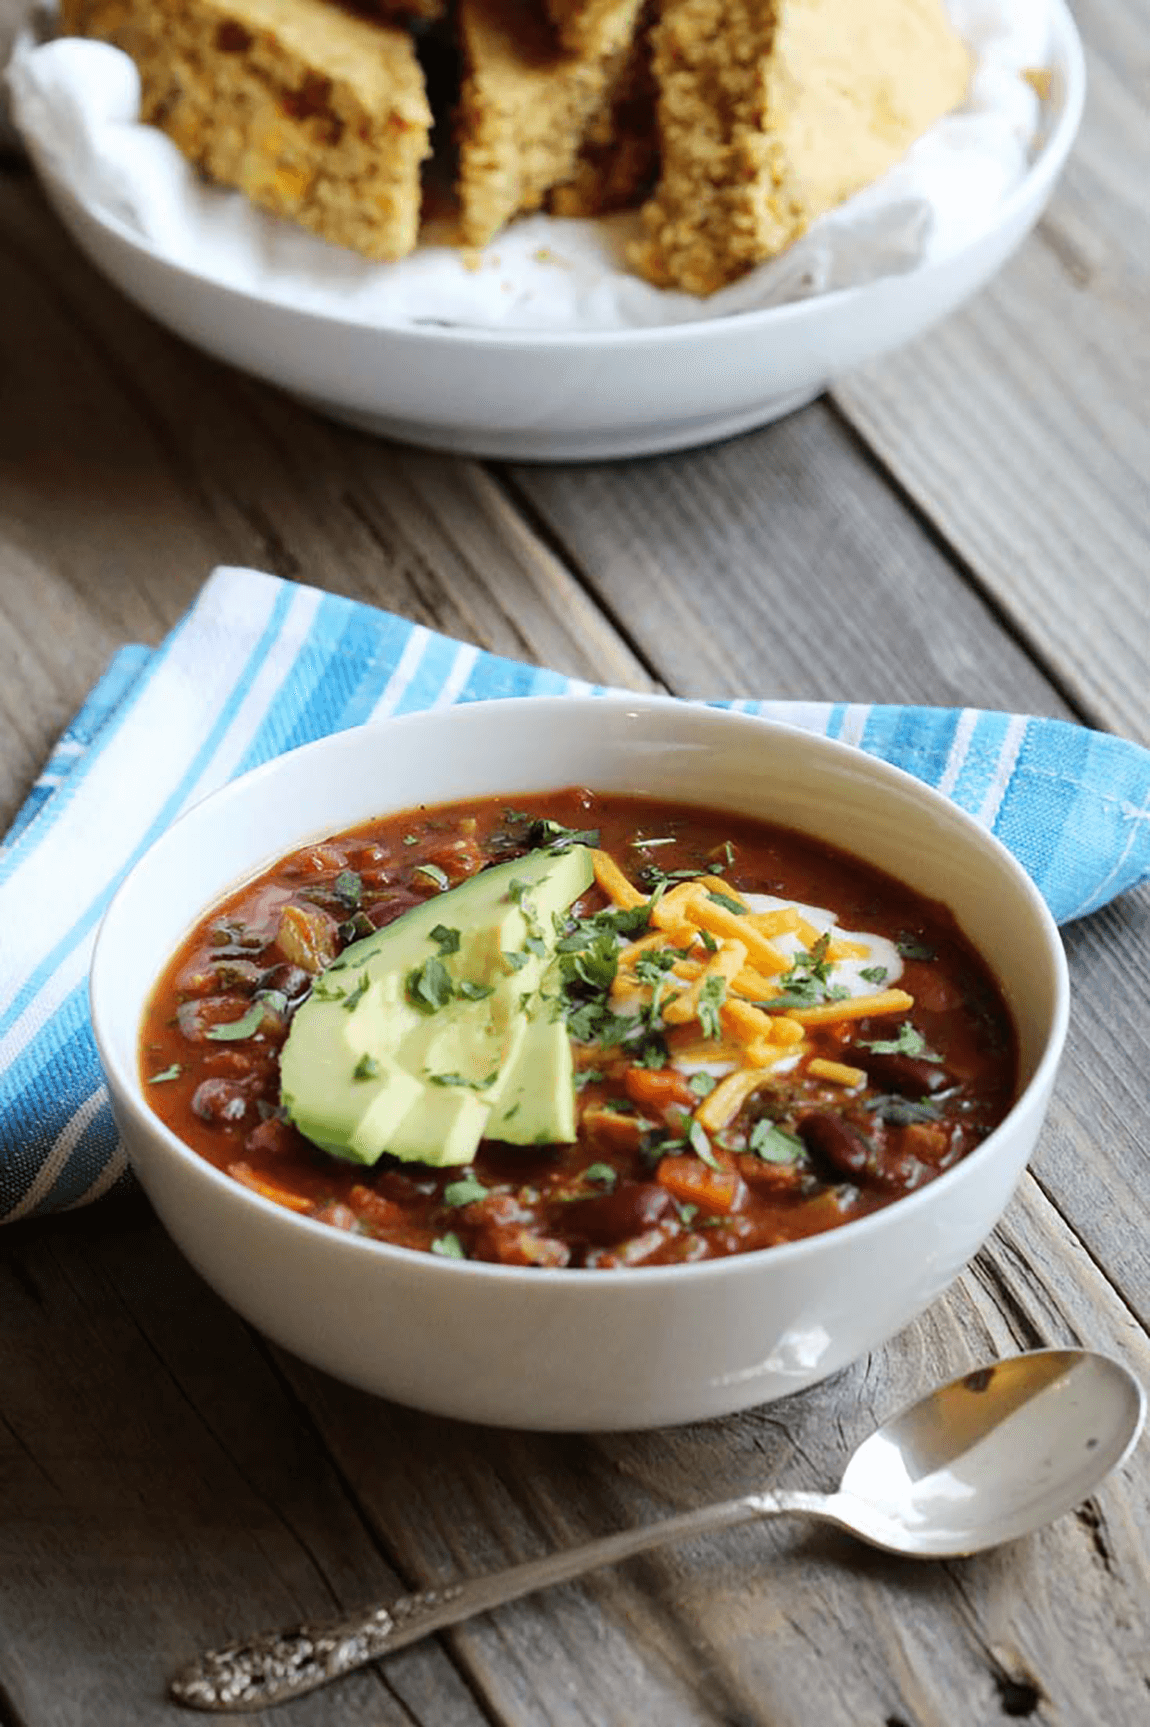 Get the Benefits of Beans with This Ultimate Vegetarian Chili